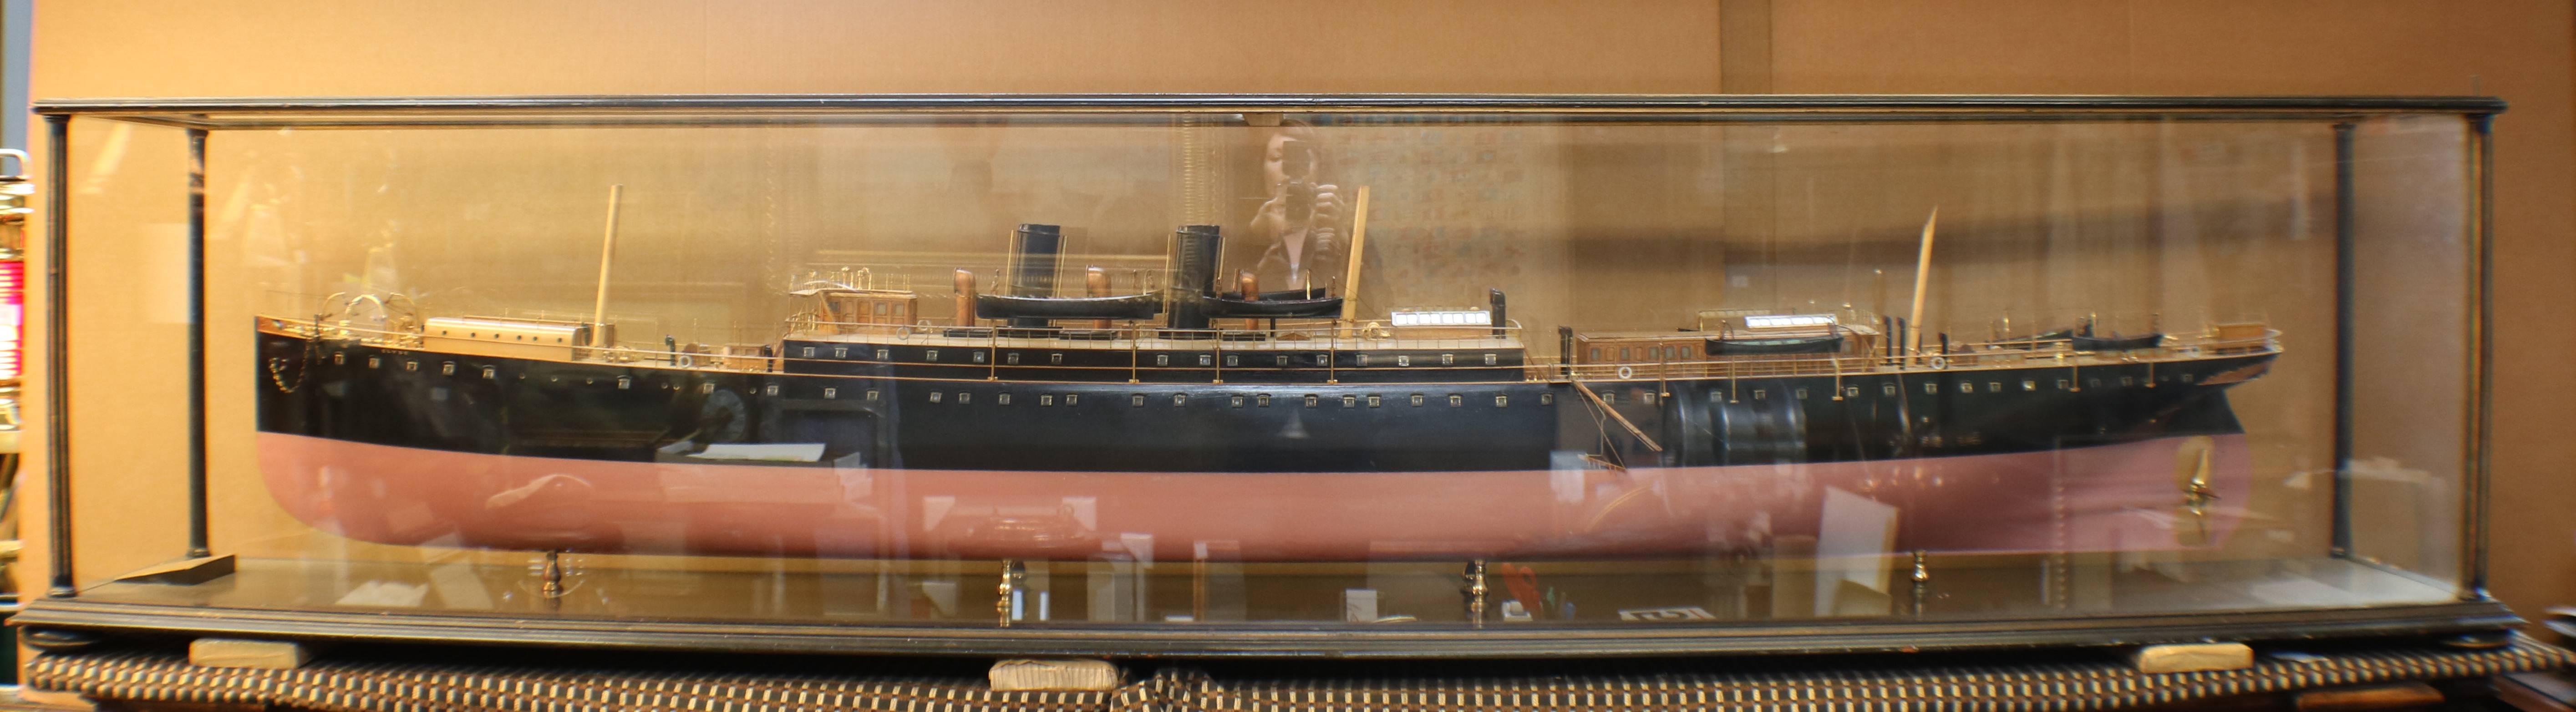 Exquisite dockyard builder's model of the Peninsular & Oriental Steamship "Clyde". Ceremoniously named after the river that launched thousands of ships. This extraordinary builder's model has over seven hundred gold plated fittings,